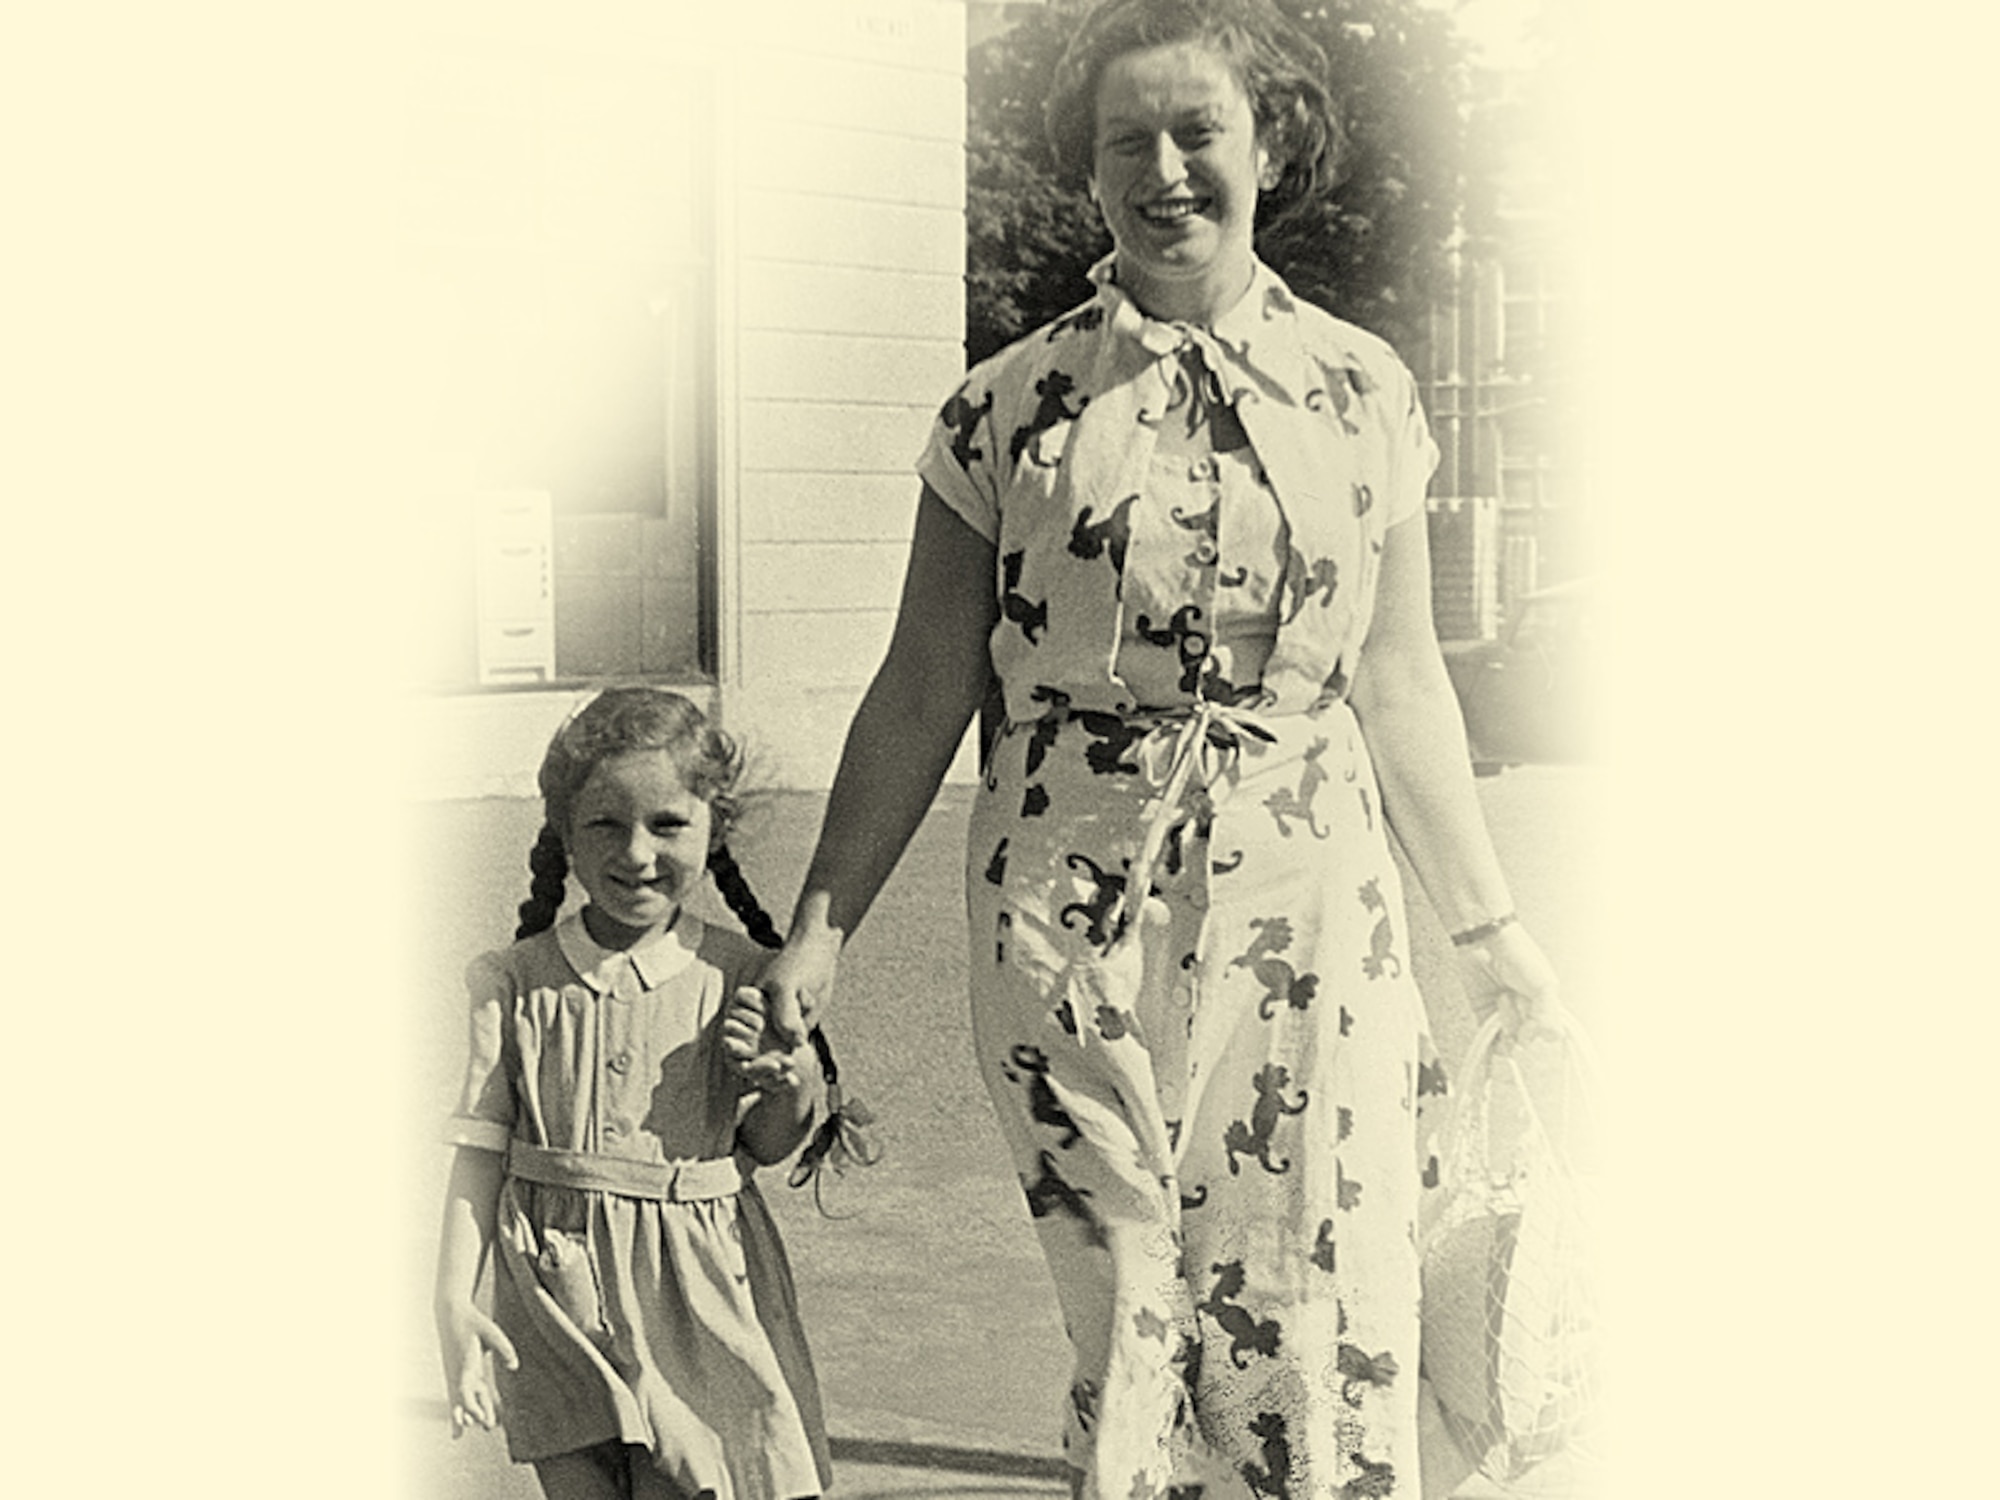 Eva Clarke (aged 5) and her mother, Anka Nathan, in Cardiff in 1950. Eva moved to Cardiff with her mother in 1948, after living with her aunt for three years. Eva’s parents, both Jewish, were kept prisoner for three years by the Germans in concentration camps until the U.S. Army liberated the camps in 1945, just days after Eva was born. (Courtesy photo)